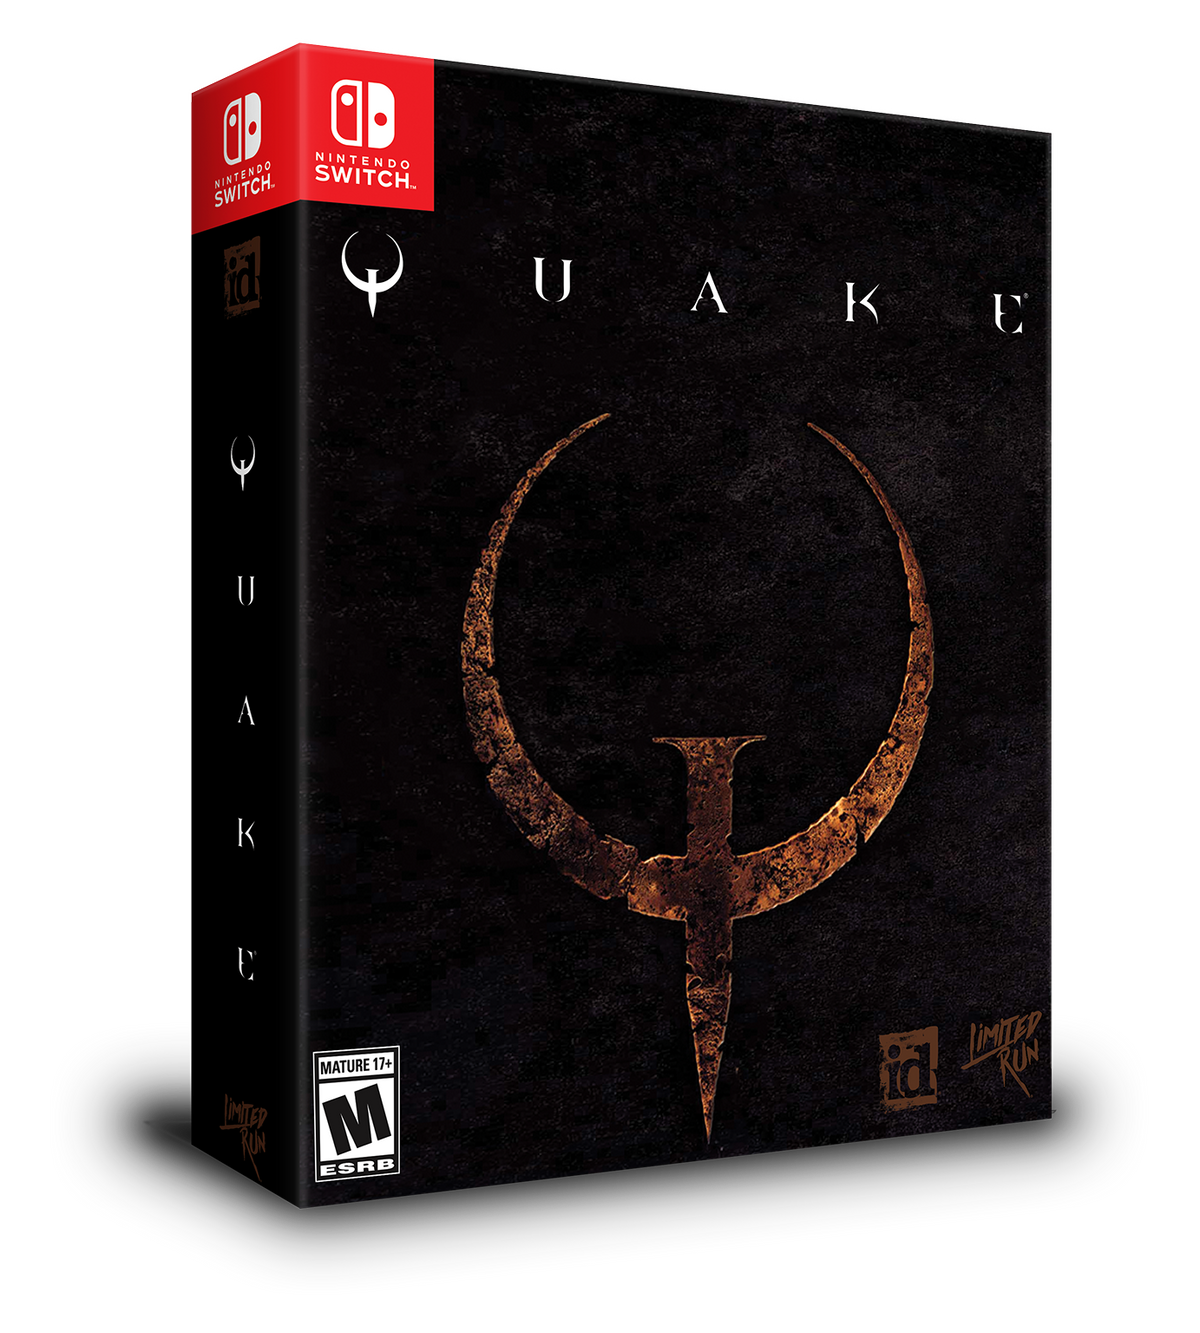 Switch Limited Run #119: Quake Deluxe Edition